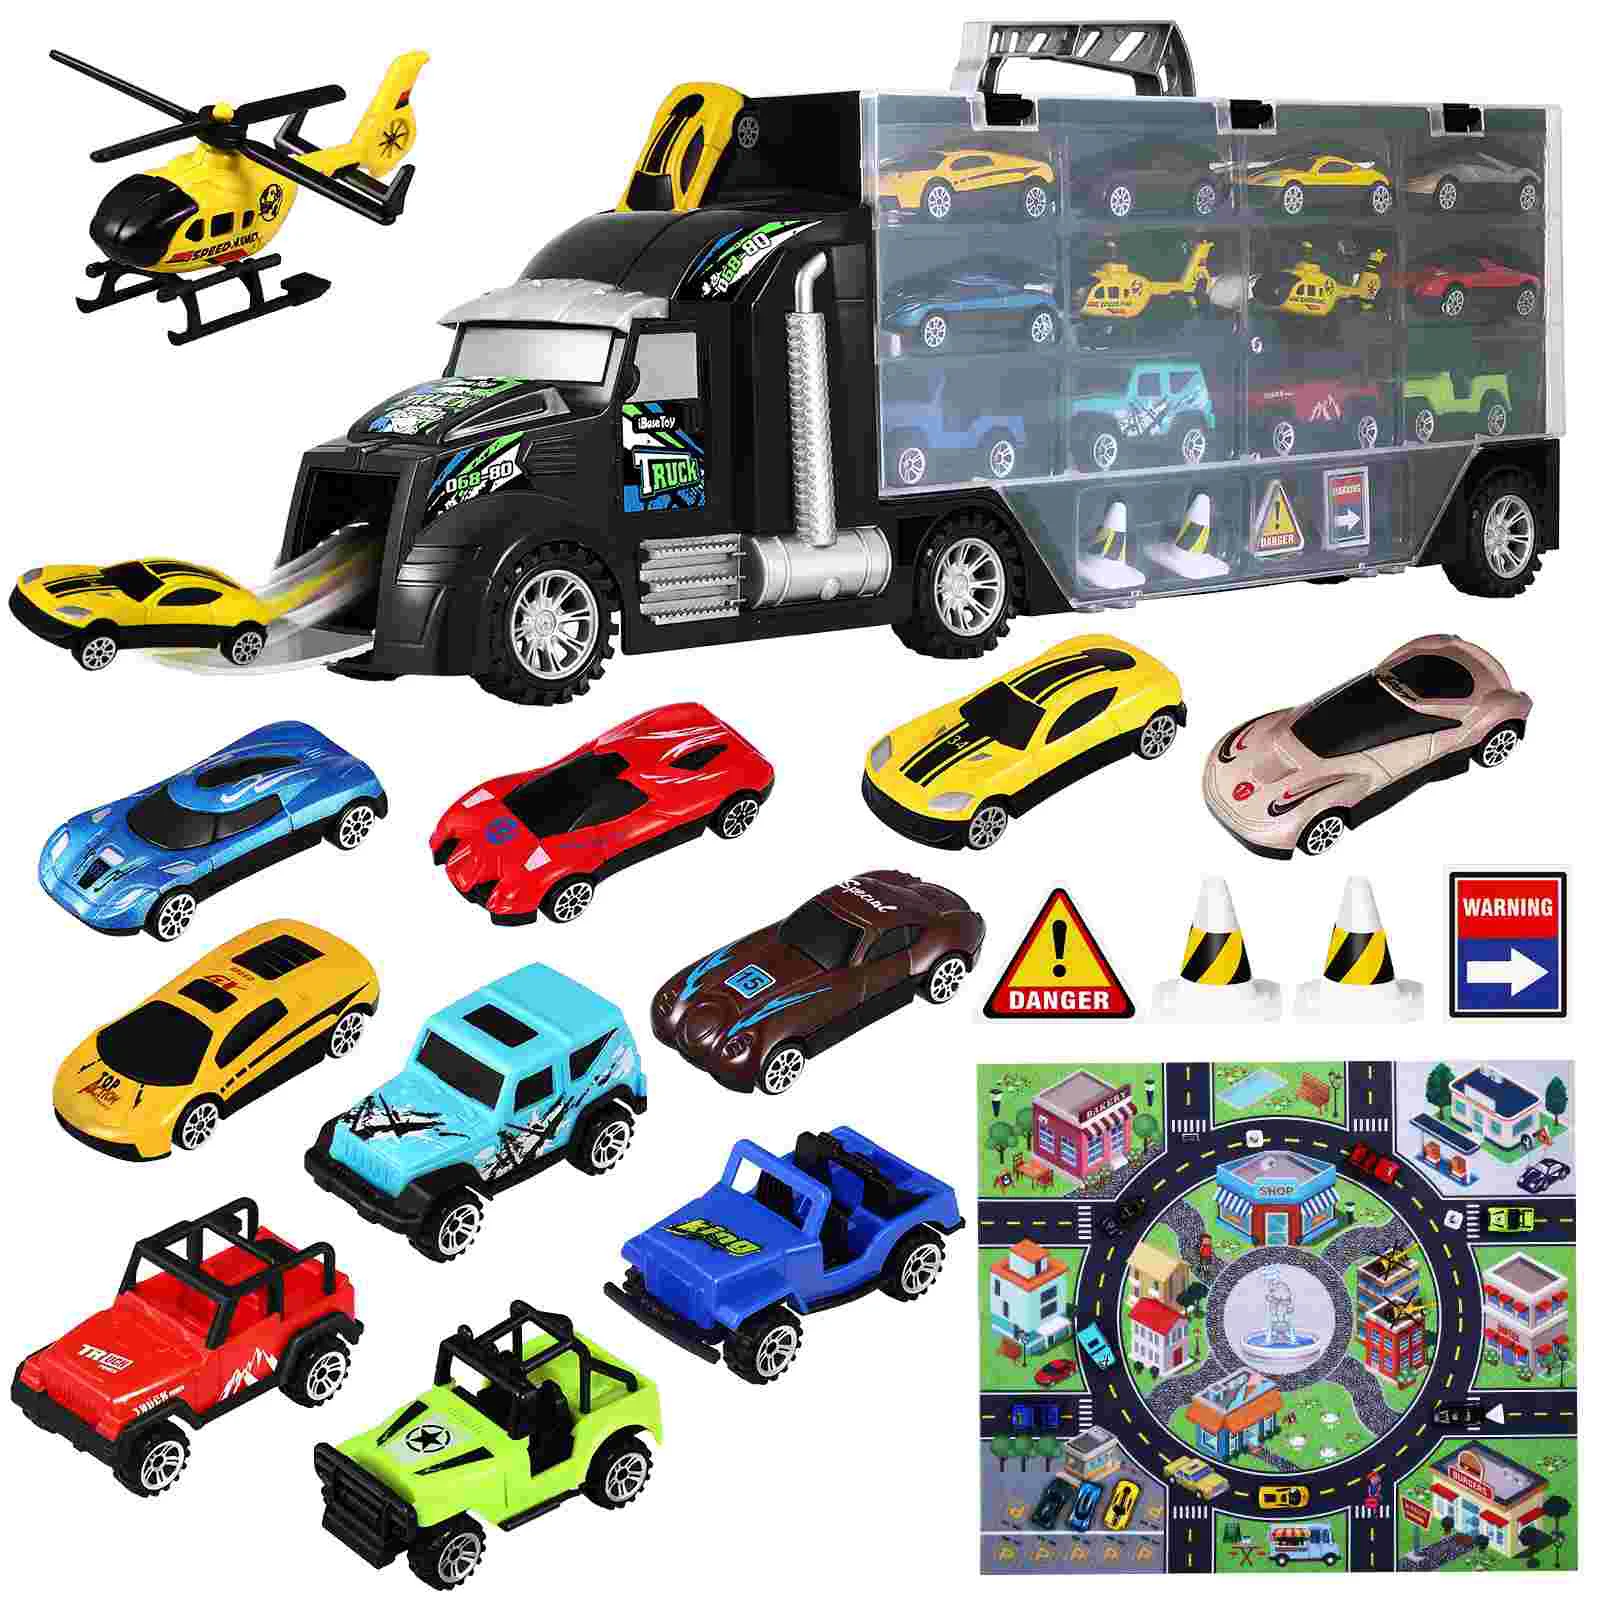 

Car Toy Cars Boys Toddler Kids Christmas Wheels Hot Girls Toddlers Truck Set Vehicles Toys Carrier Transport Gifts